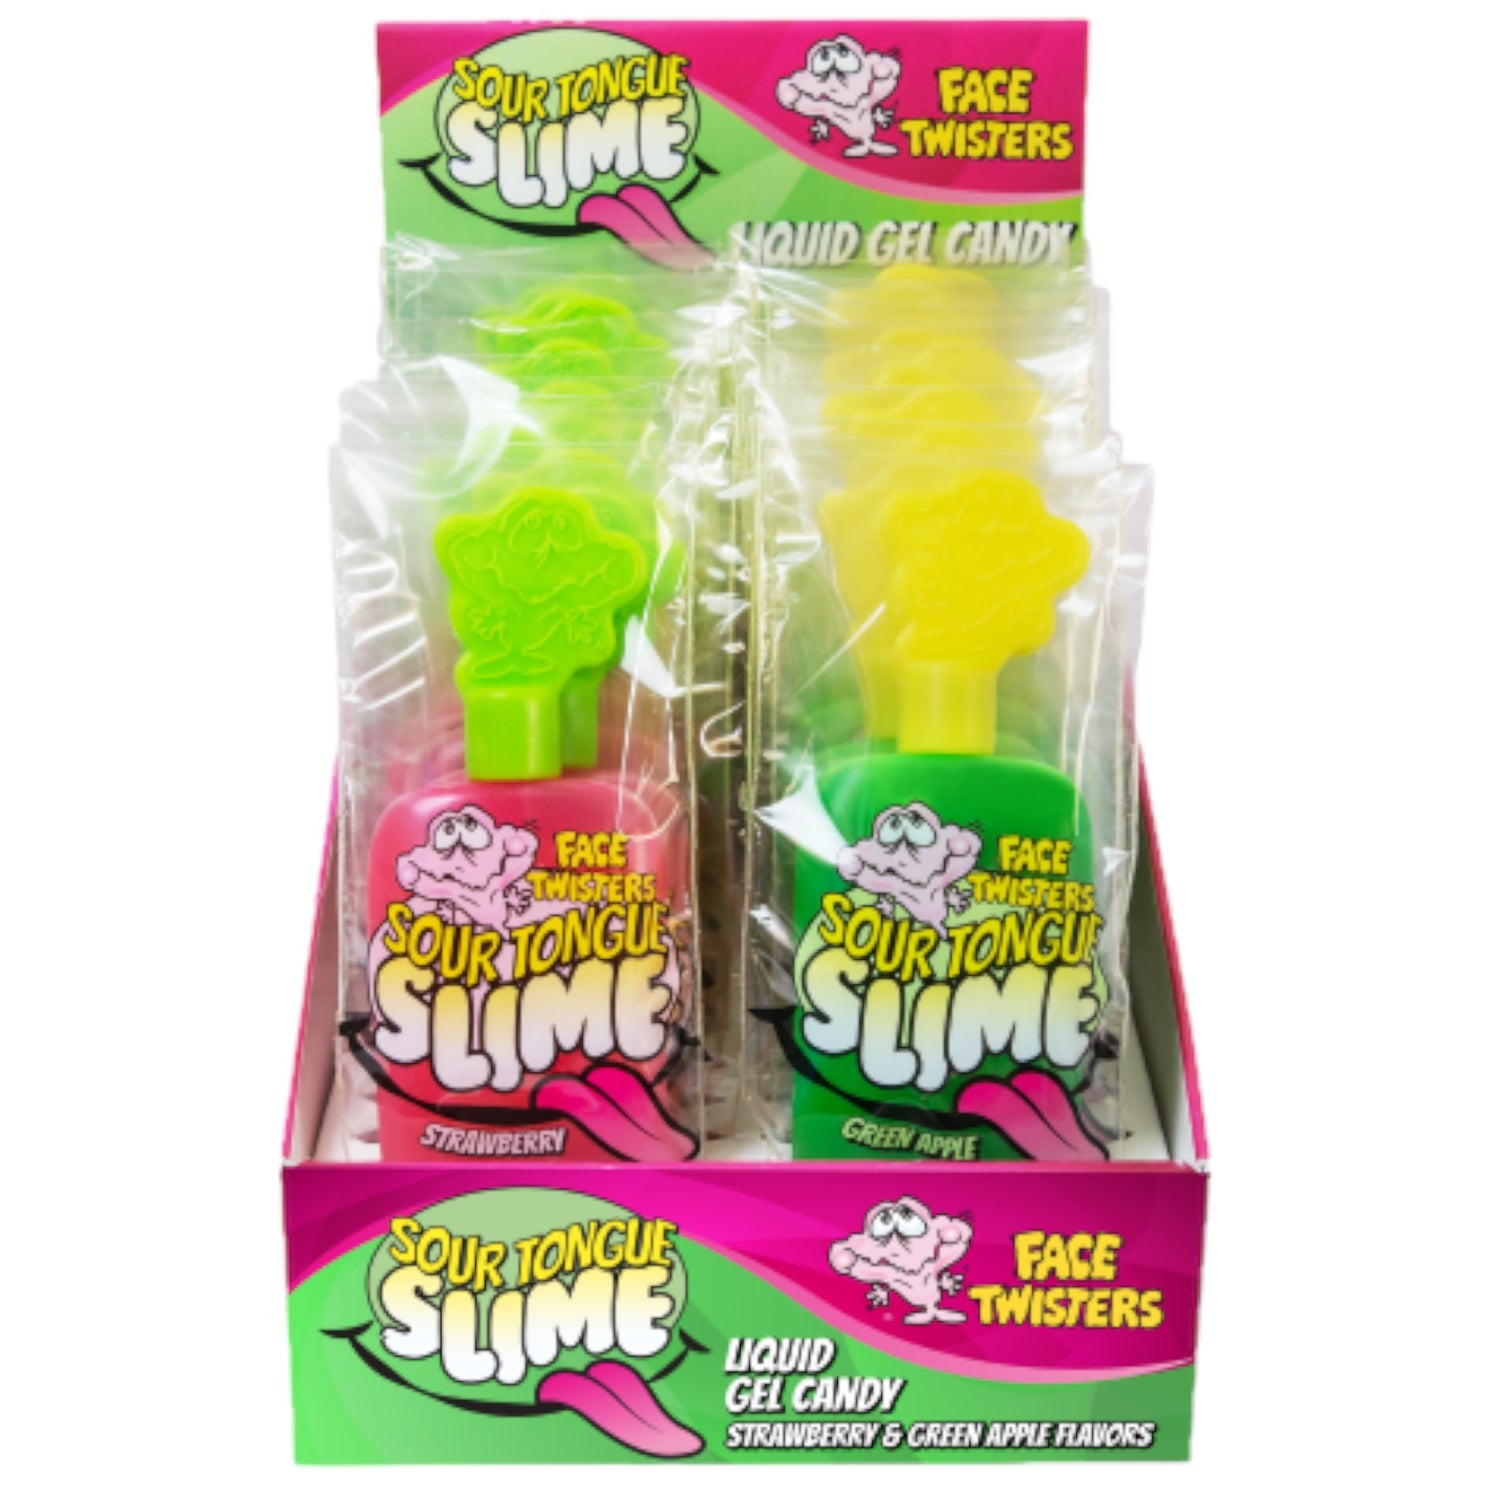 Face Twisters Sour Tongue Slime Green Apple